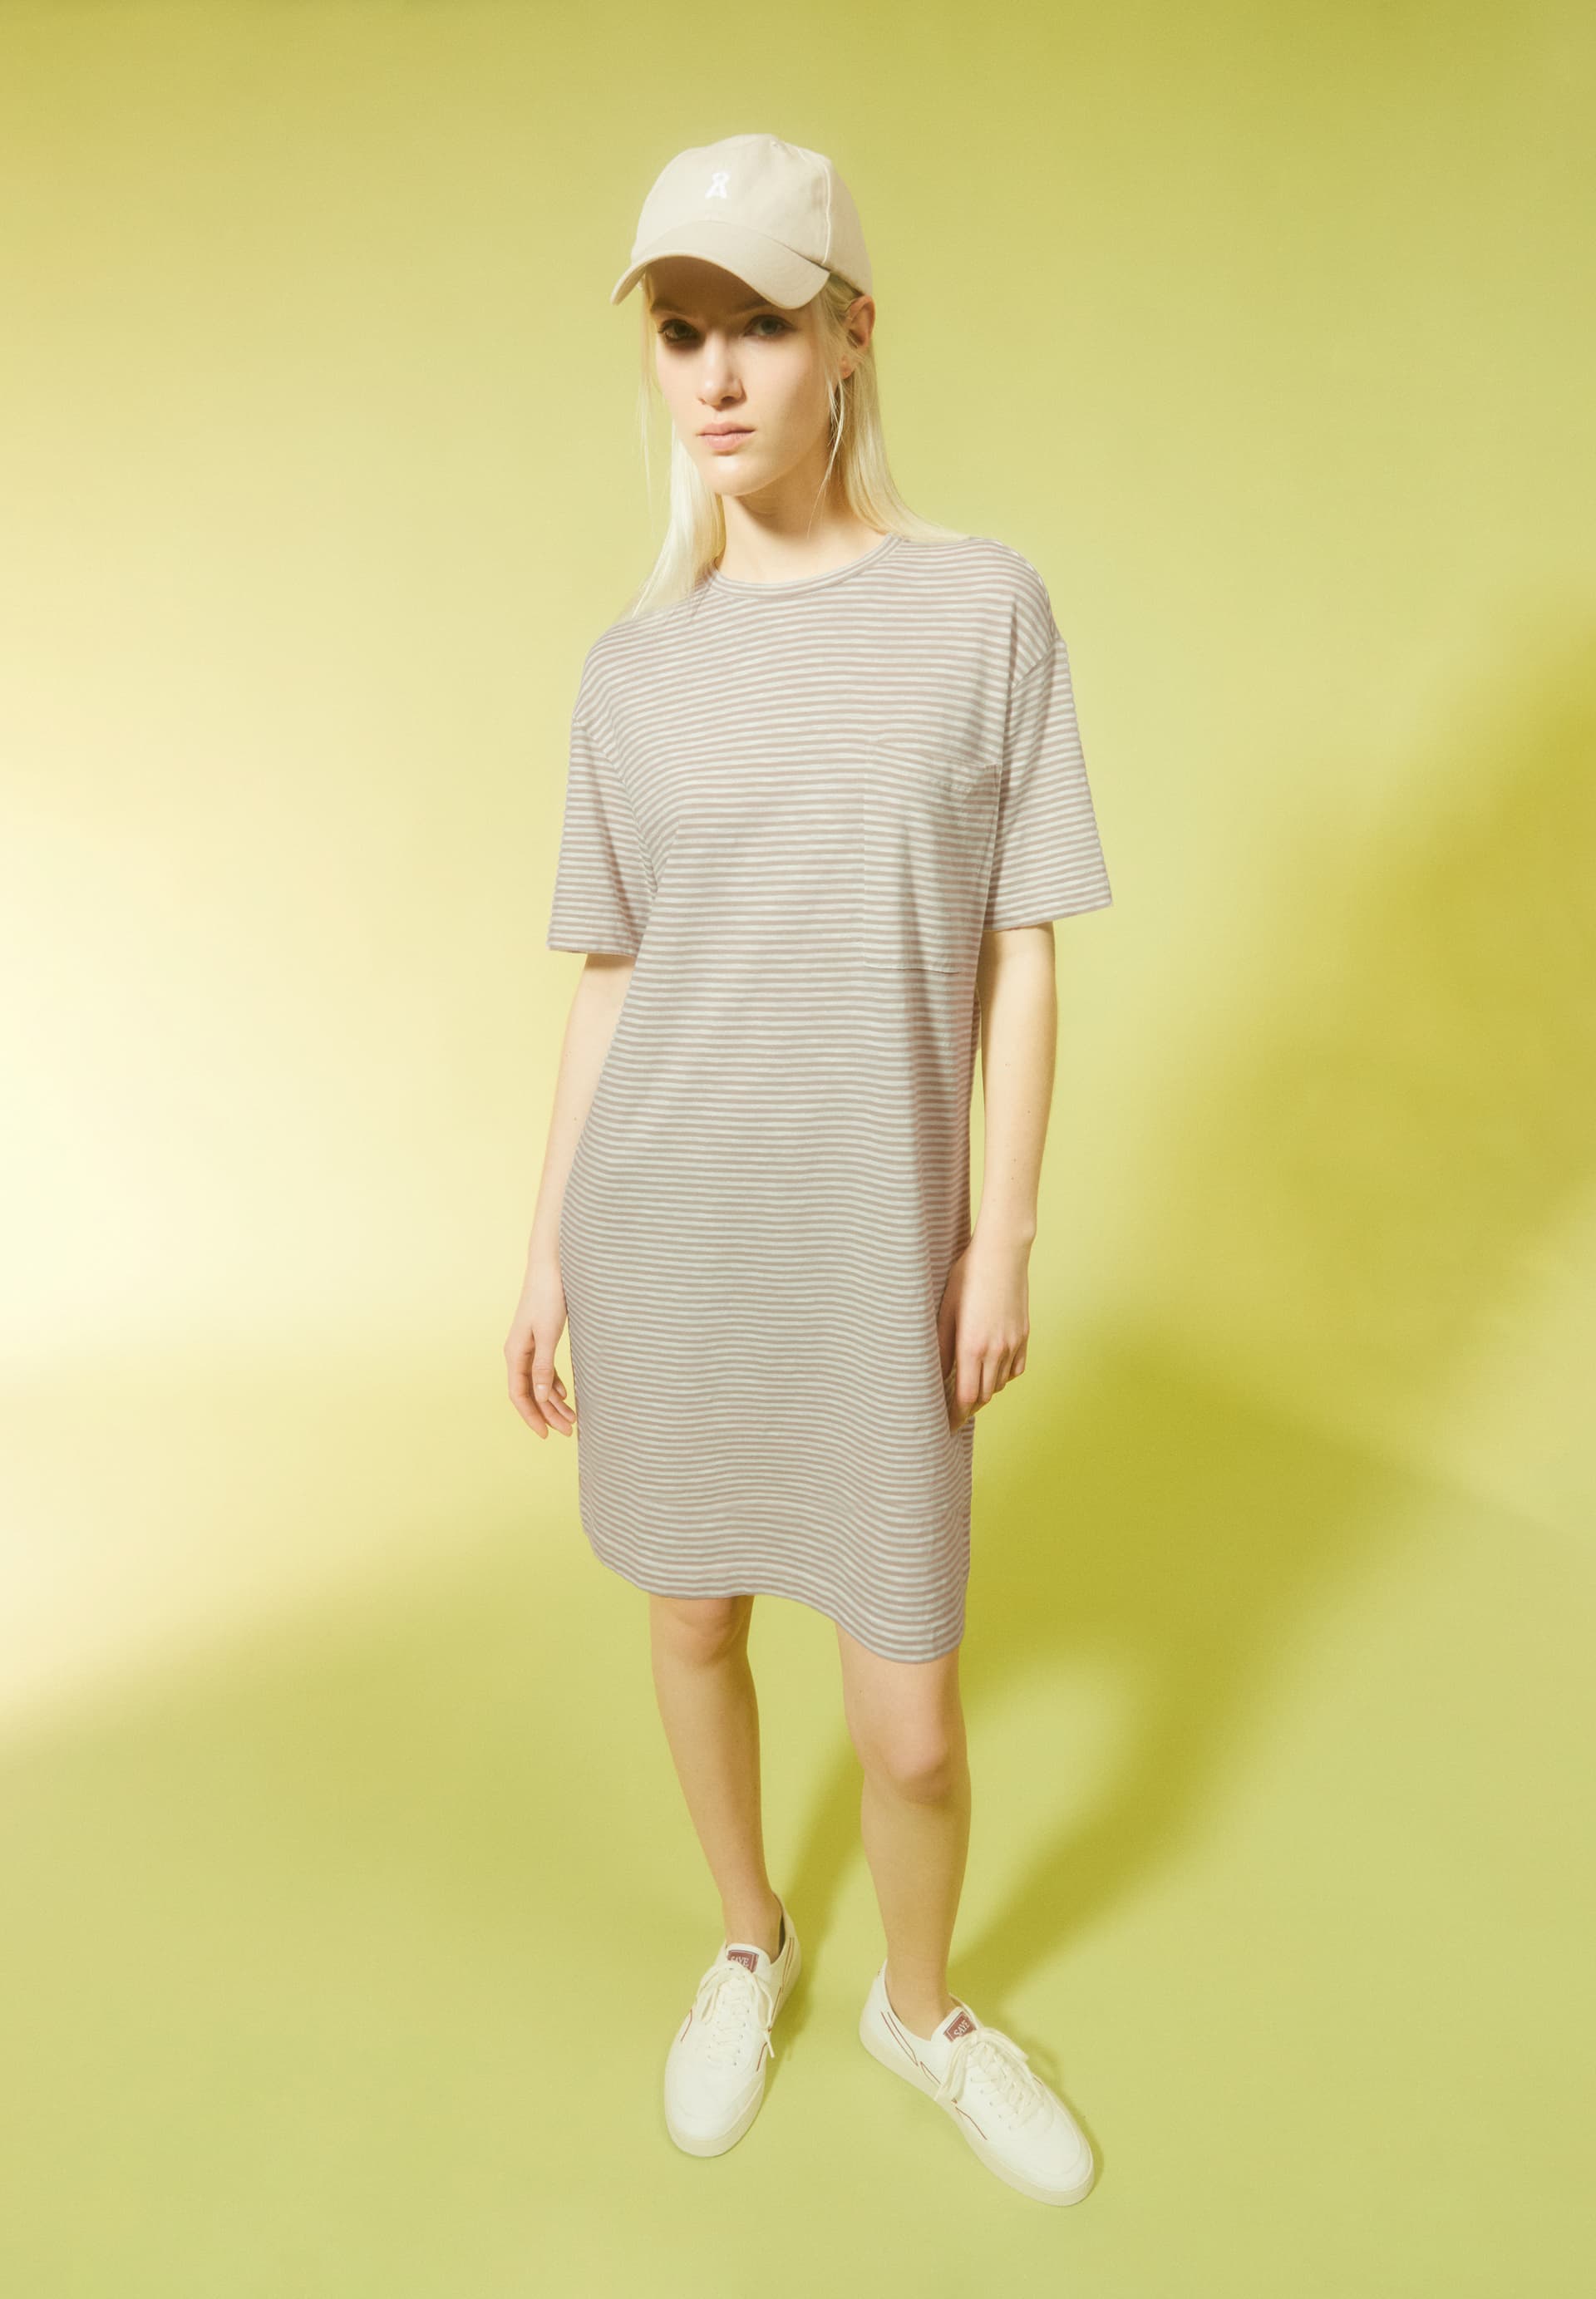 CHAARA LOVELY STRIPES Jersey Dress Relaxed Fit made of Organic Cotton